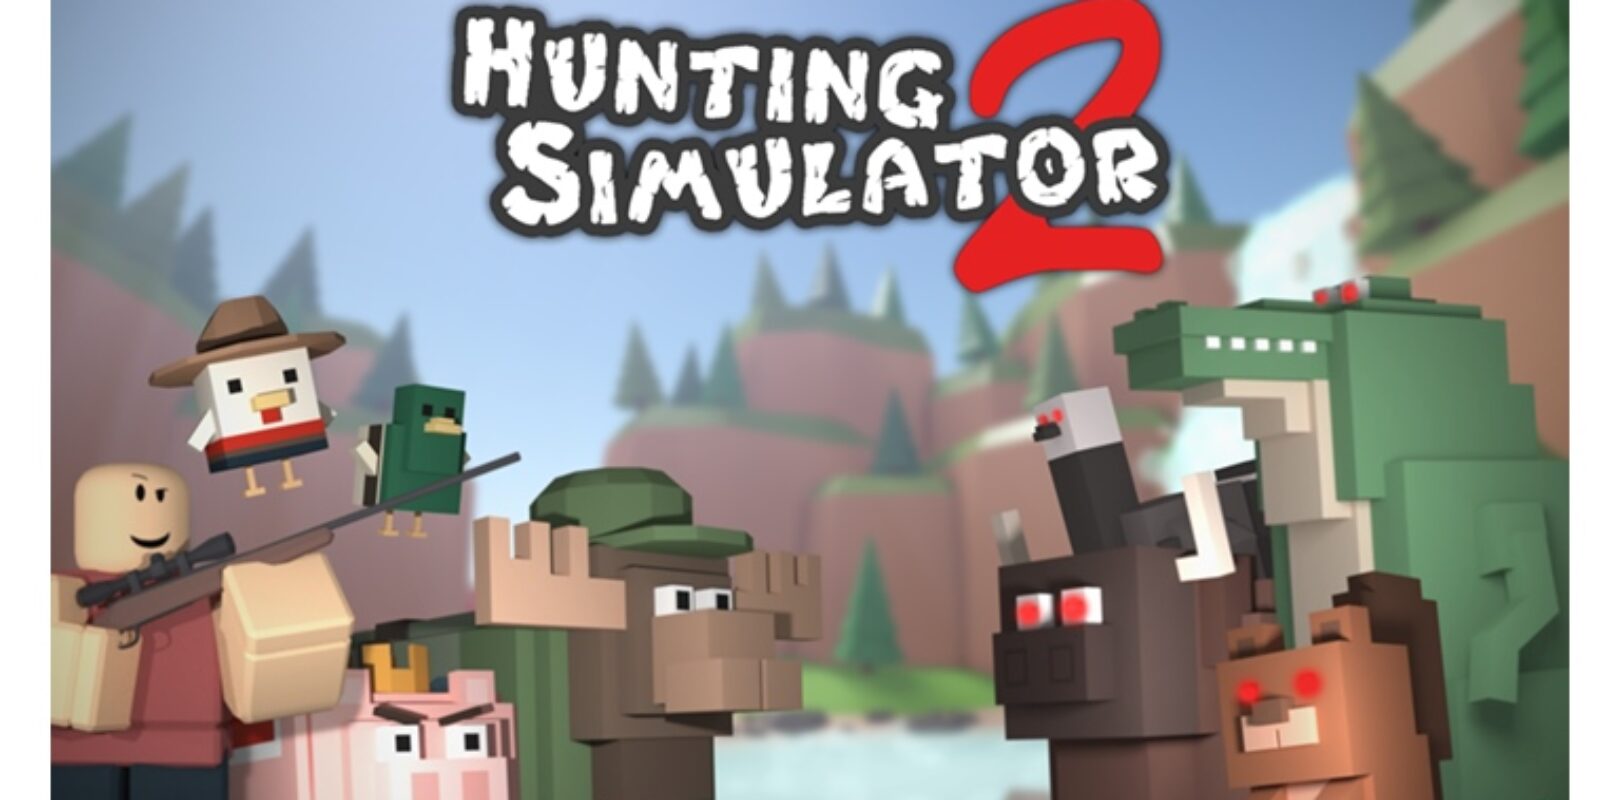 Hunting Simulator 2 Codes July 2021 Pivotal Gamers - lolwut codes roblox